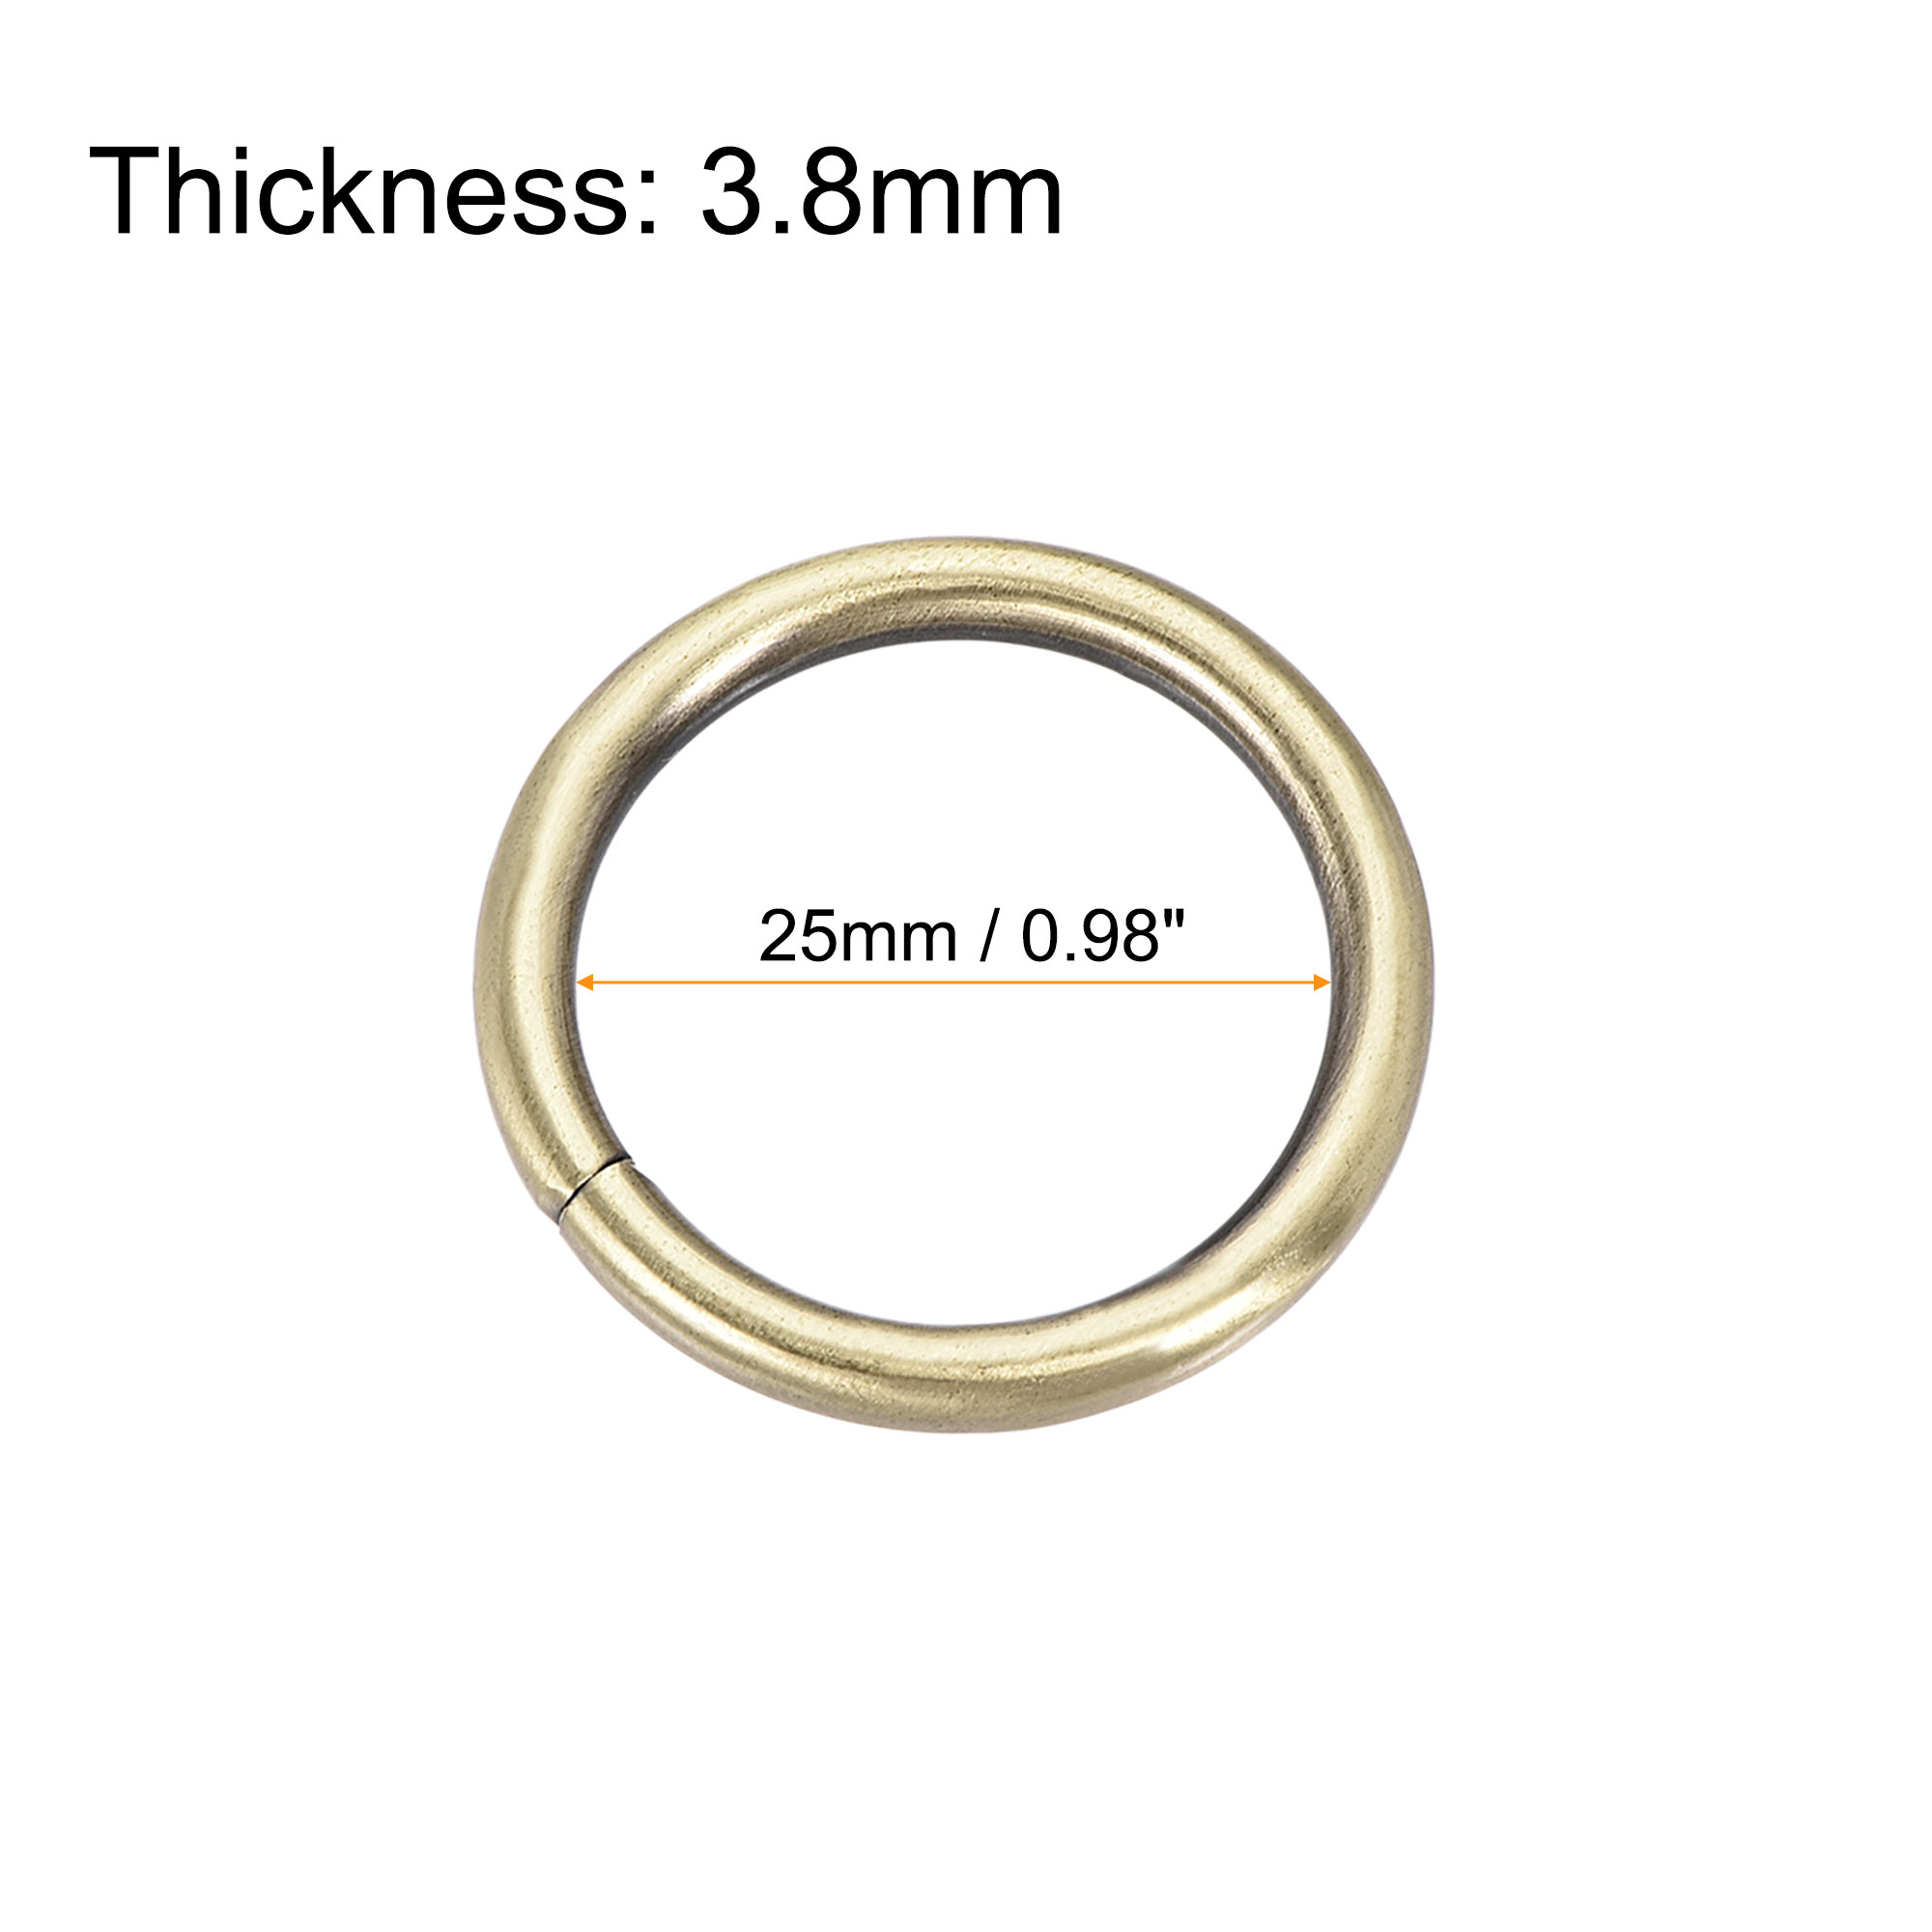 Unique Bargains Metal O Ring 25mm(0.98") ID 3.8mm Thickness Iron Rings for DIY Bronze Tone 15pcs